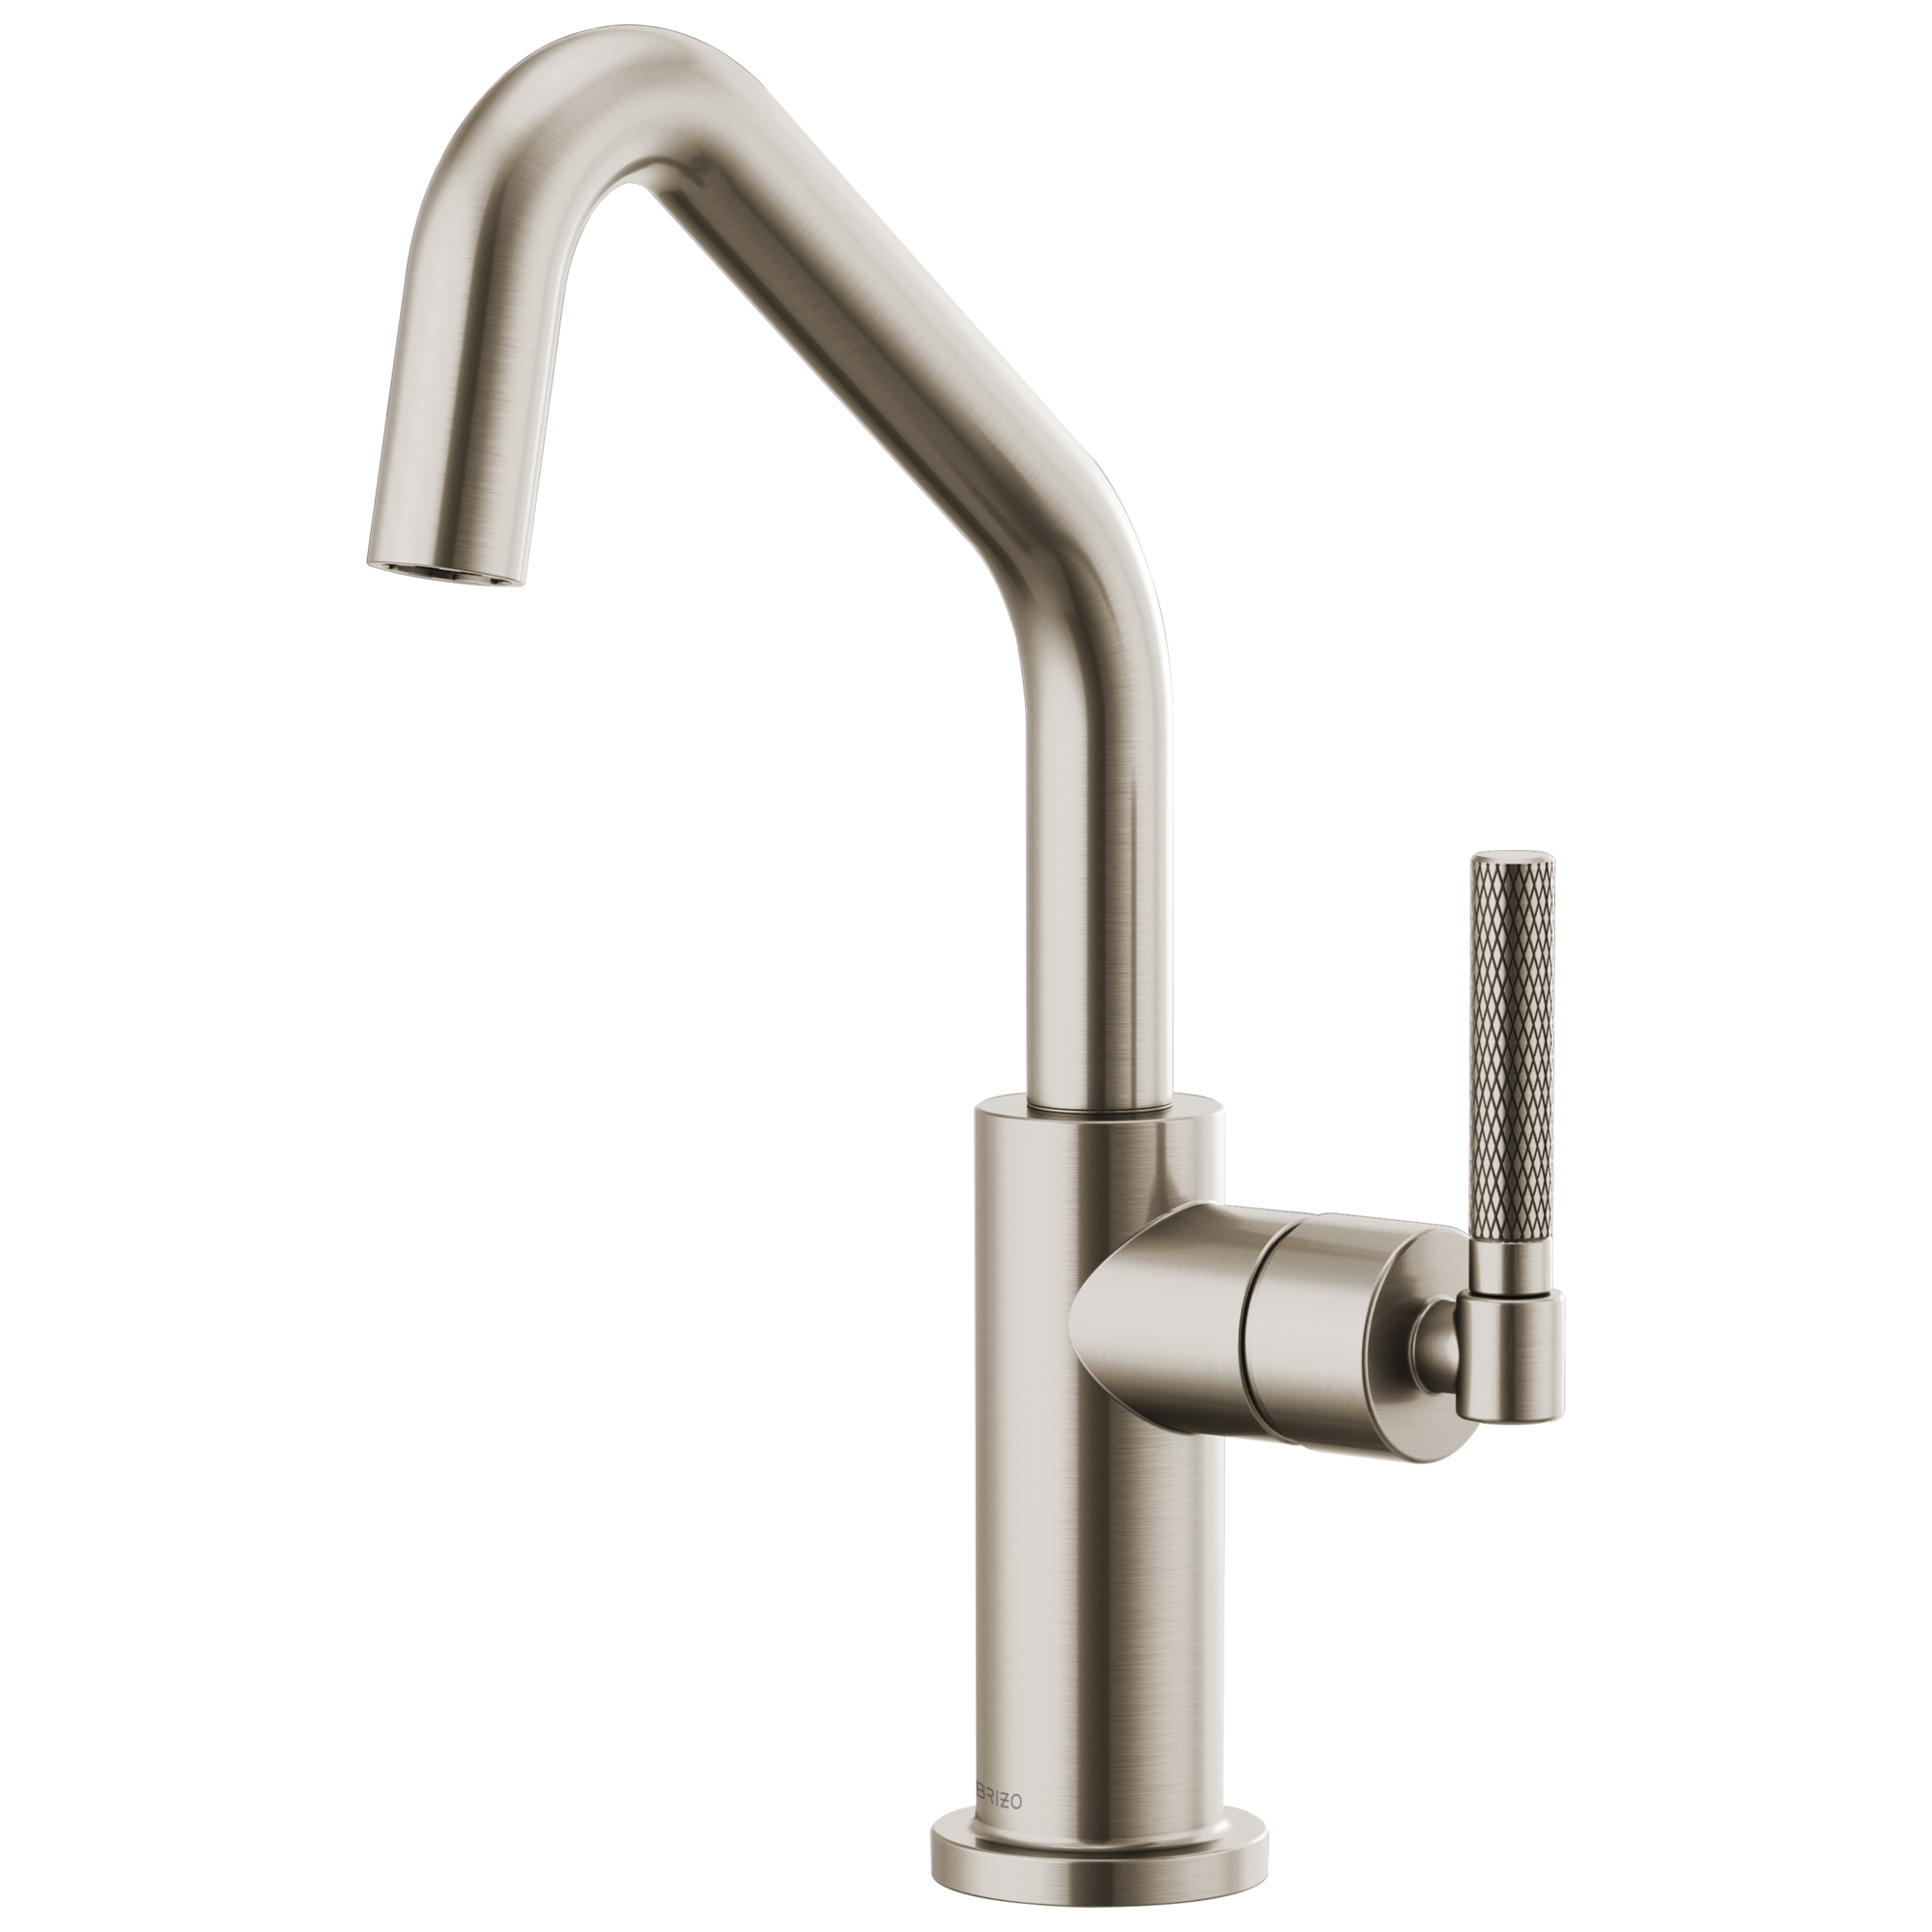 Brizo Litze: Bar Faucet with Angled Spout and Knurled Handle